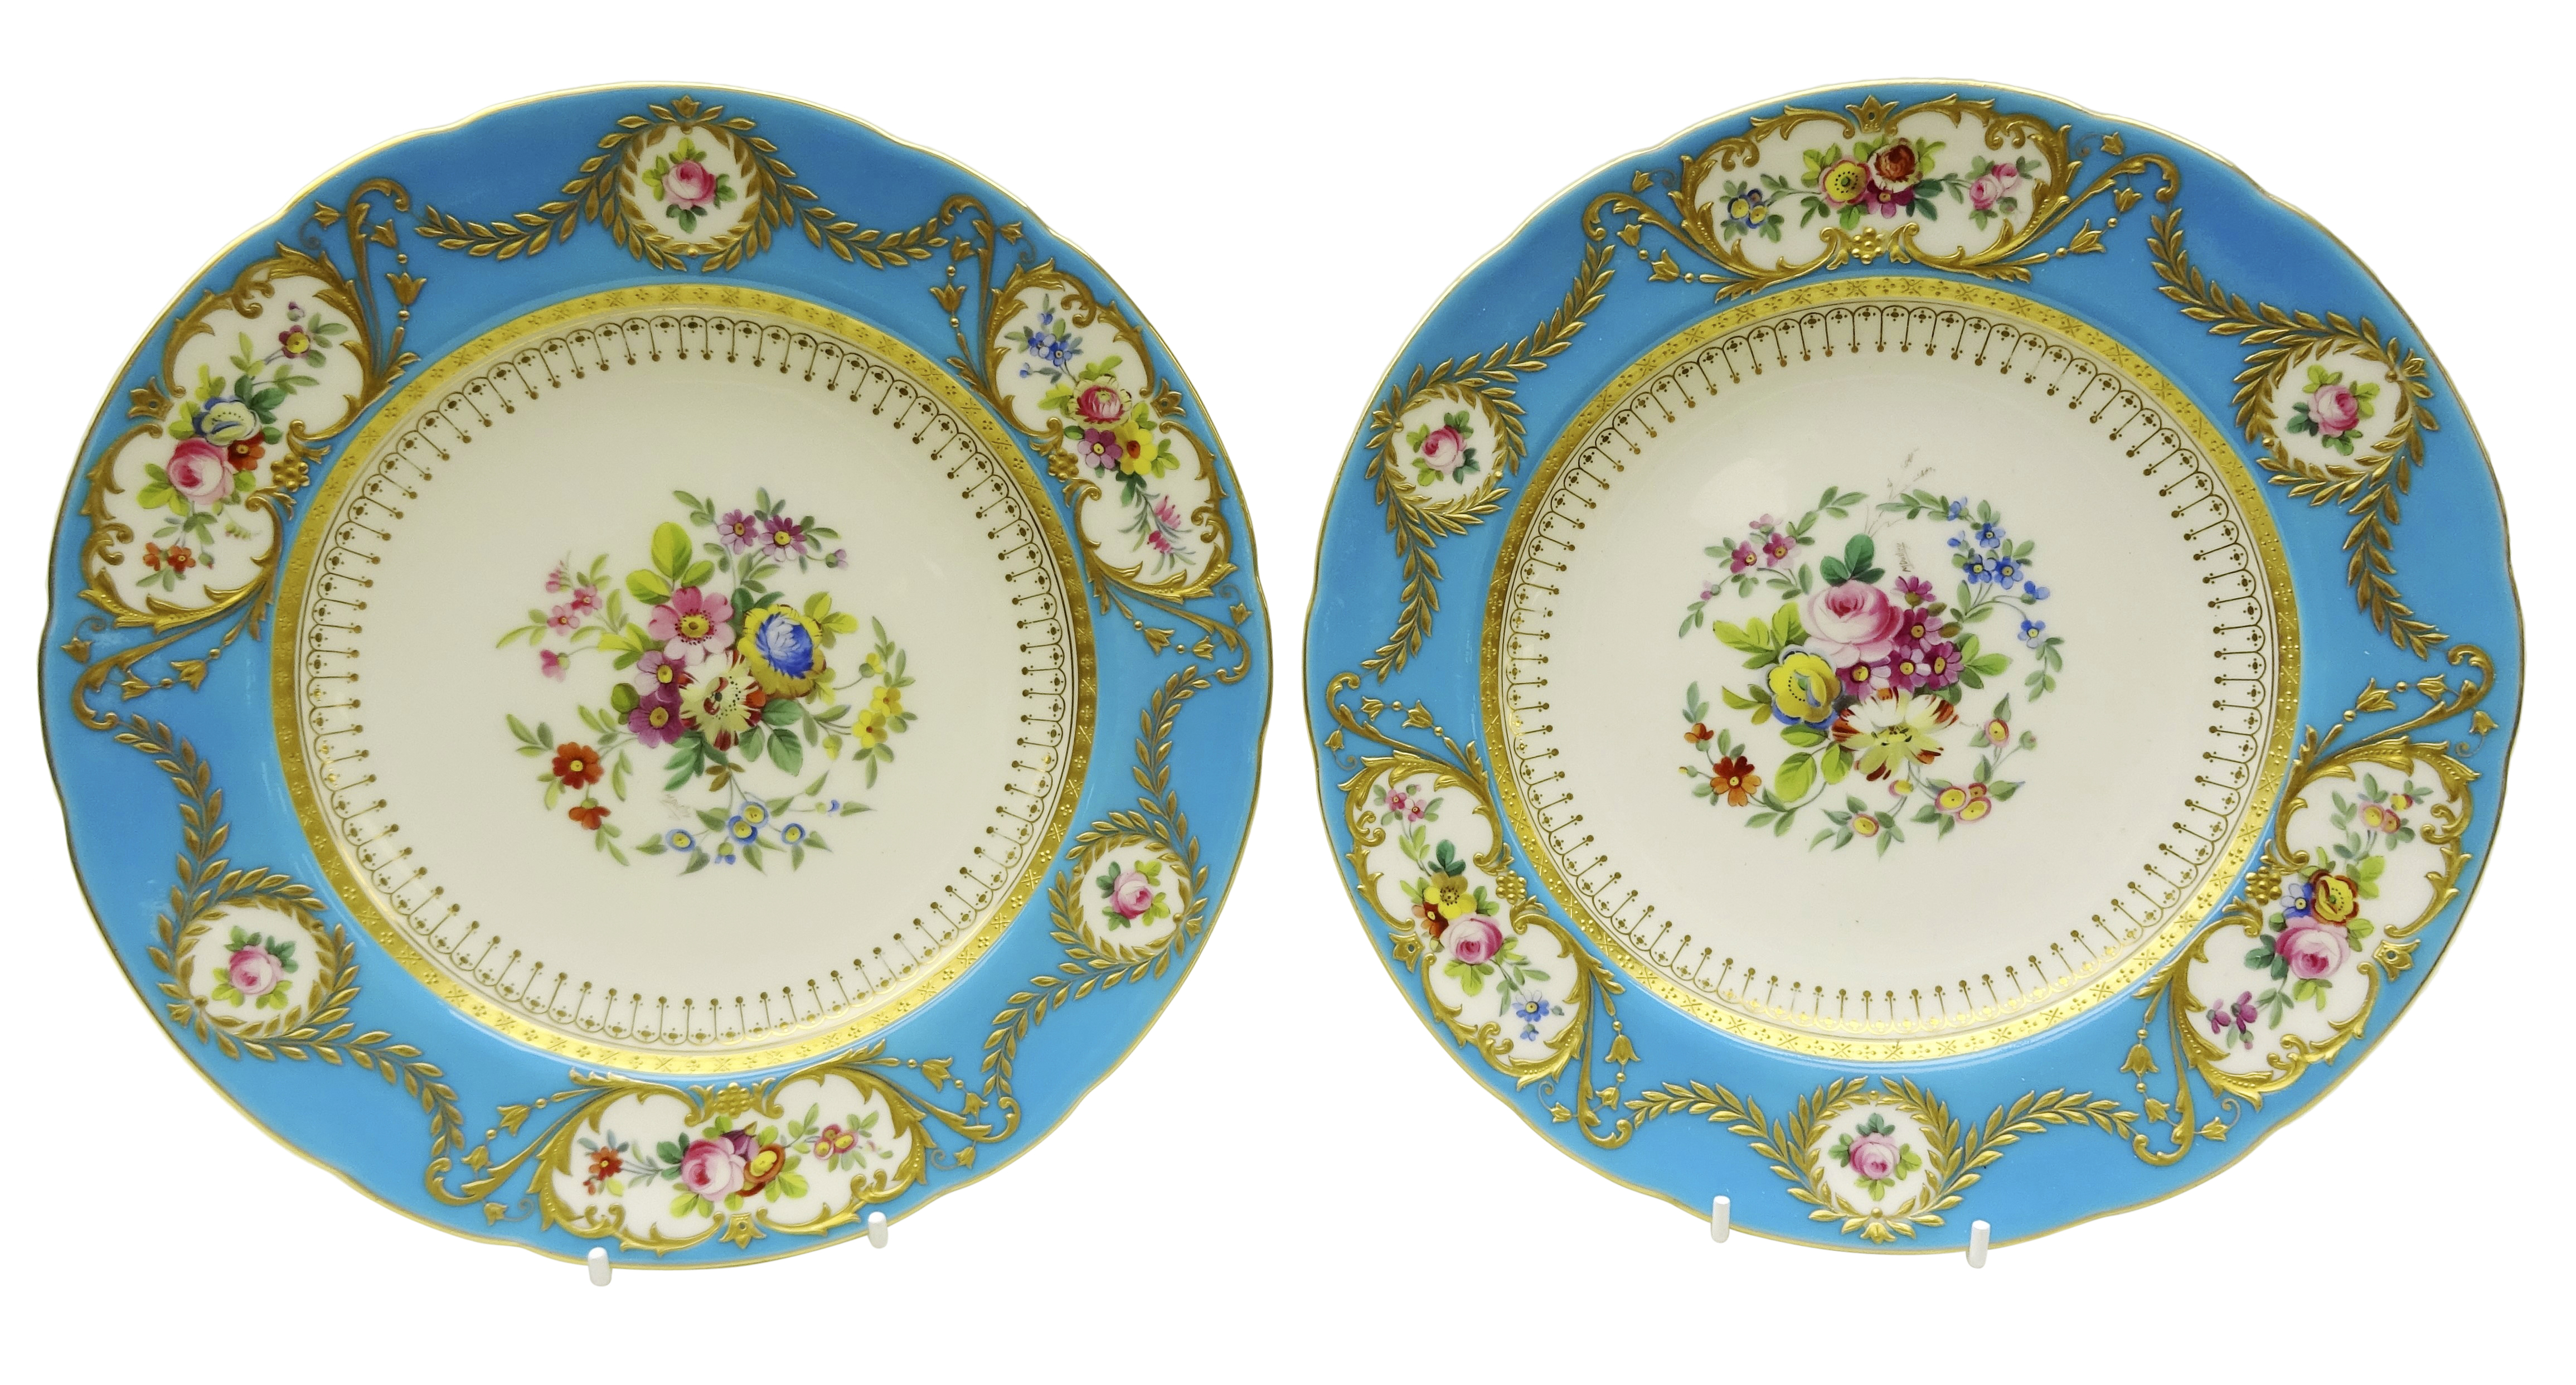 Pair early 20th century Minton plates hand painted with floral sprays by M.